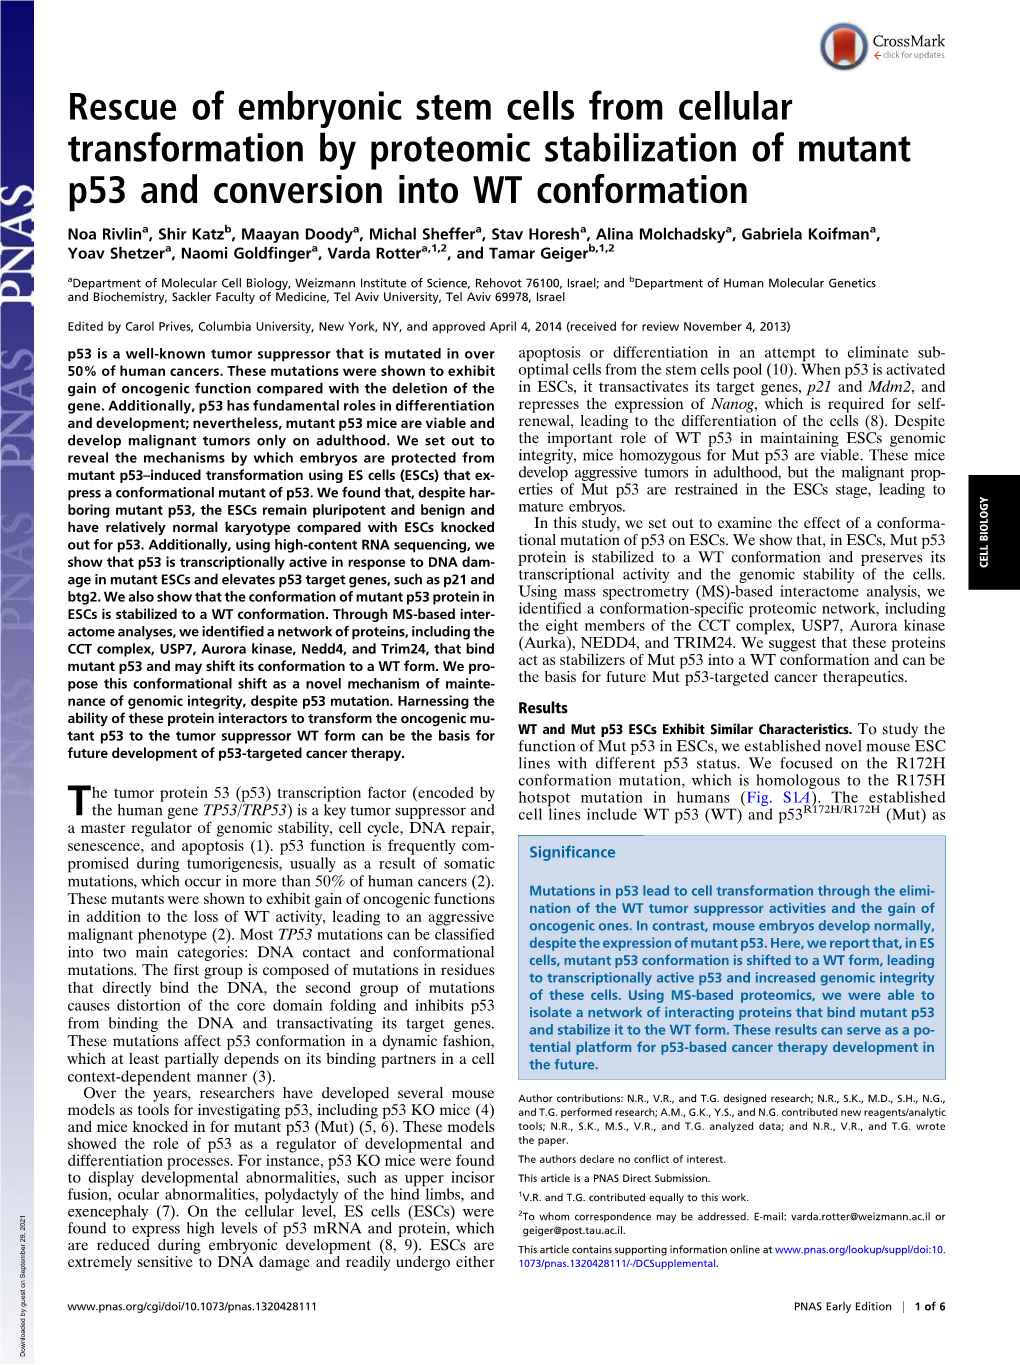 Rescue of Embryonic Stem Cells from Cellular Transformation by Proteomic Stabilization of Mutant P53 and Conversion Into WT Conformation